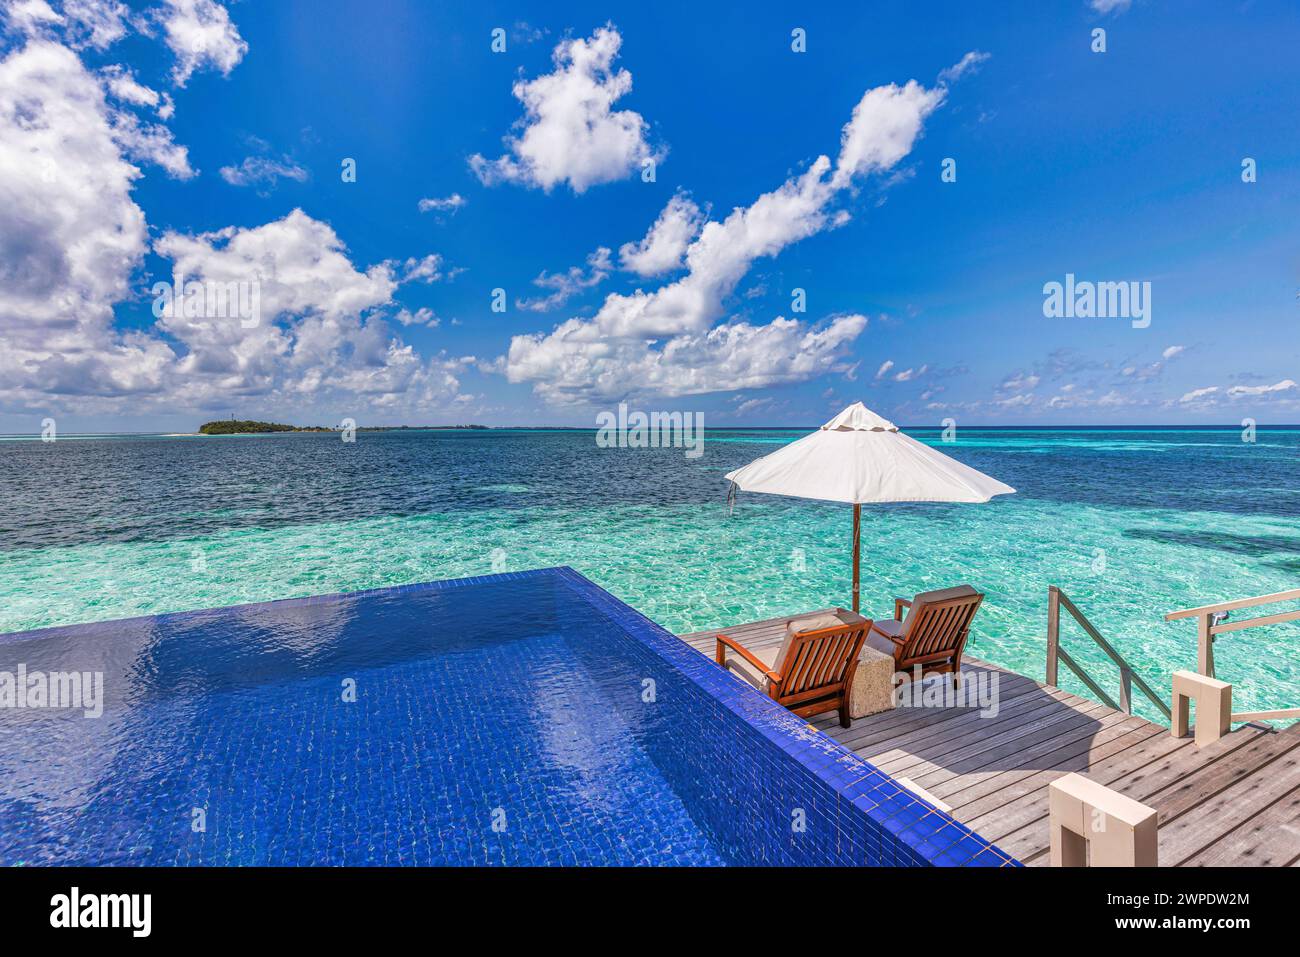 Luxury beach resort, bungalow near endless pool over beautiful blue sea. Amazing tropical island, summer vacation concept. Couple chairs with umbrella Stock Photo